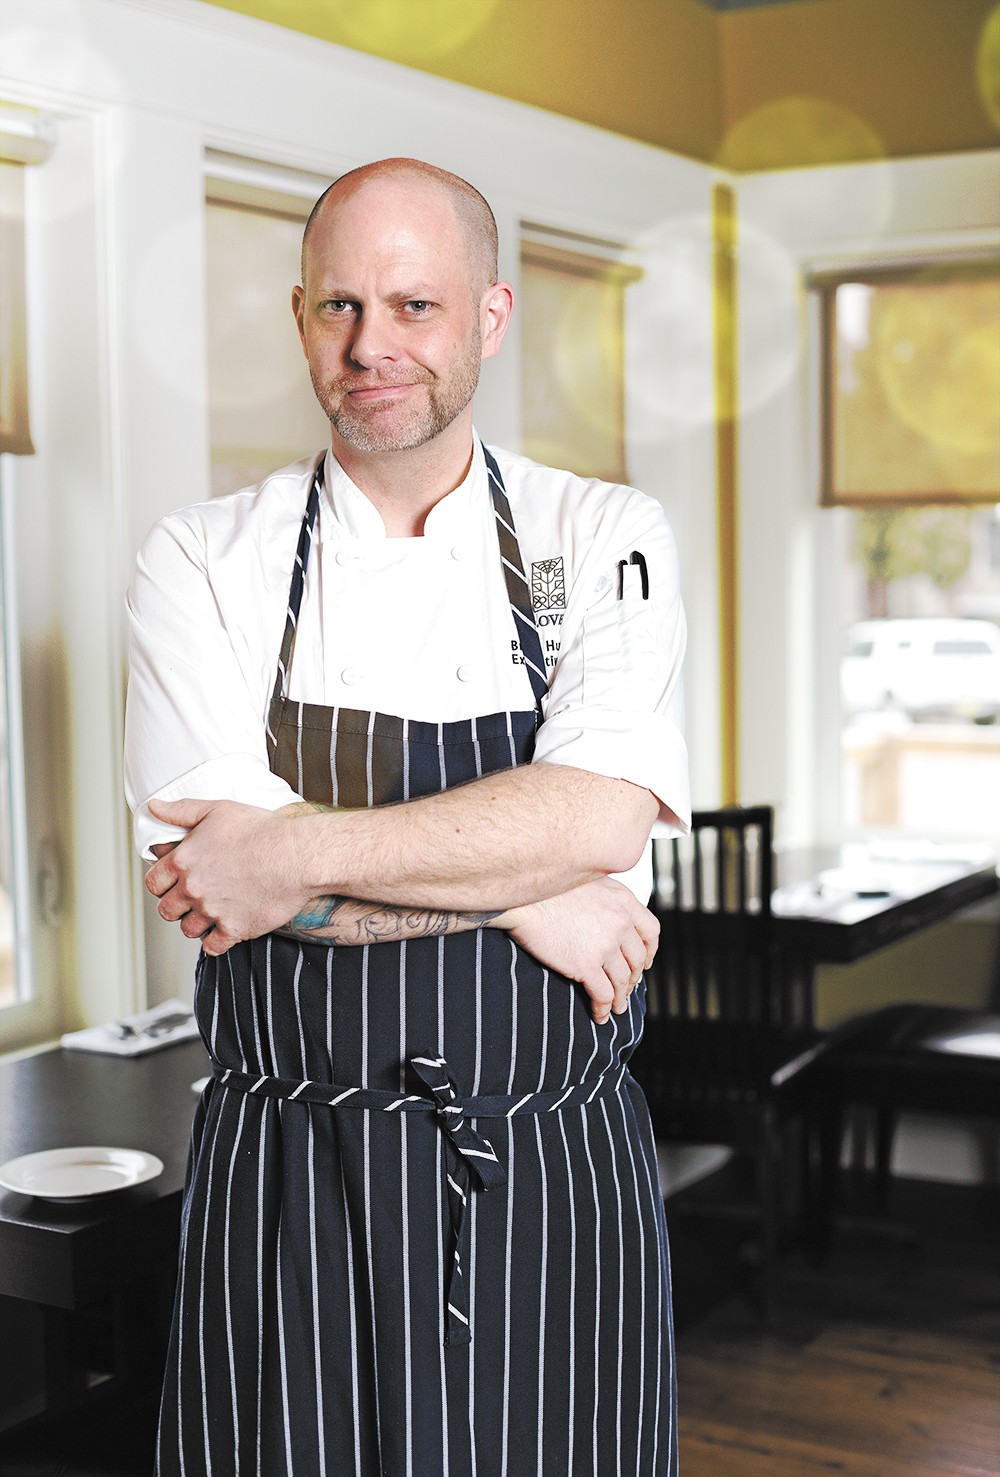 Meet Your Chef: Brian Hutchins